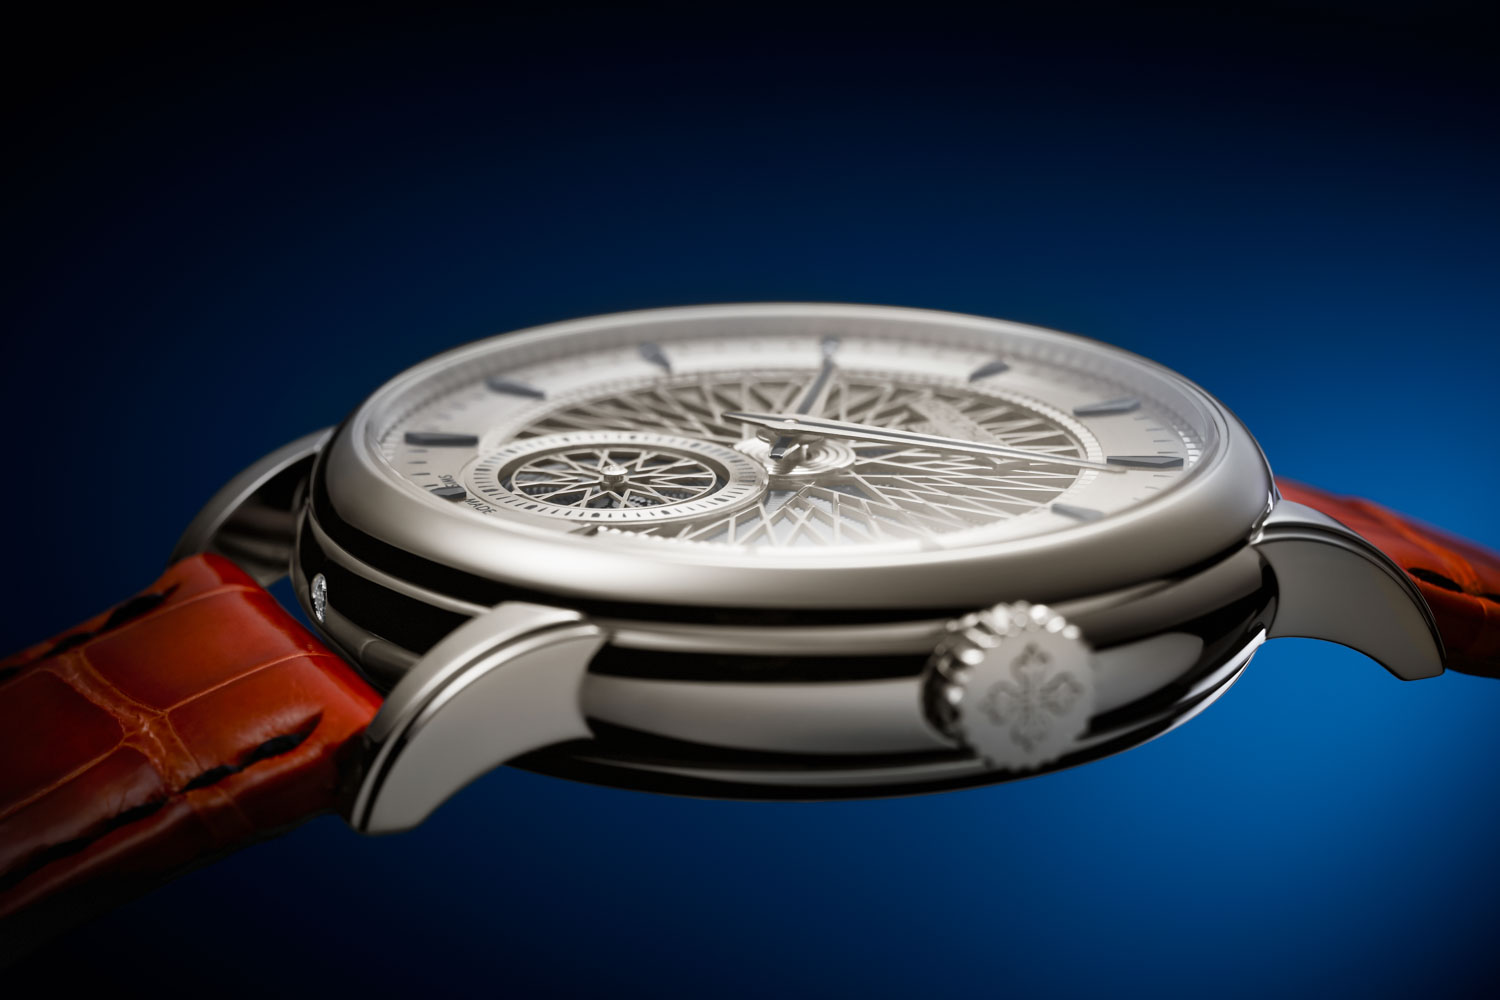 The sound produced by the Ref. 5750 Patek Philippe “Advanced Research” Minute Repeater is first routed to the sound lever and then to the oscillating wafer and subsequently propagated through four openings at 12, 3, 6, and 9 o'clock in a titanium ring; the sound waves exit through a narrow slot between the case back and the case band; a dust filter protects the movement without affecting the sound; the case material does not influence the sound and its propagation regardless of whether the case material is rose, yellow, or white gold or platinum